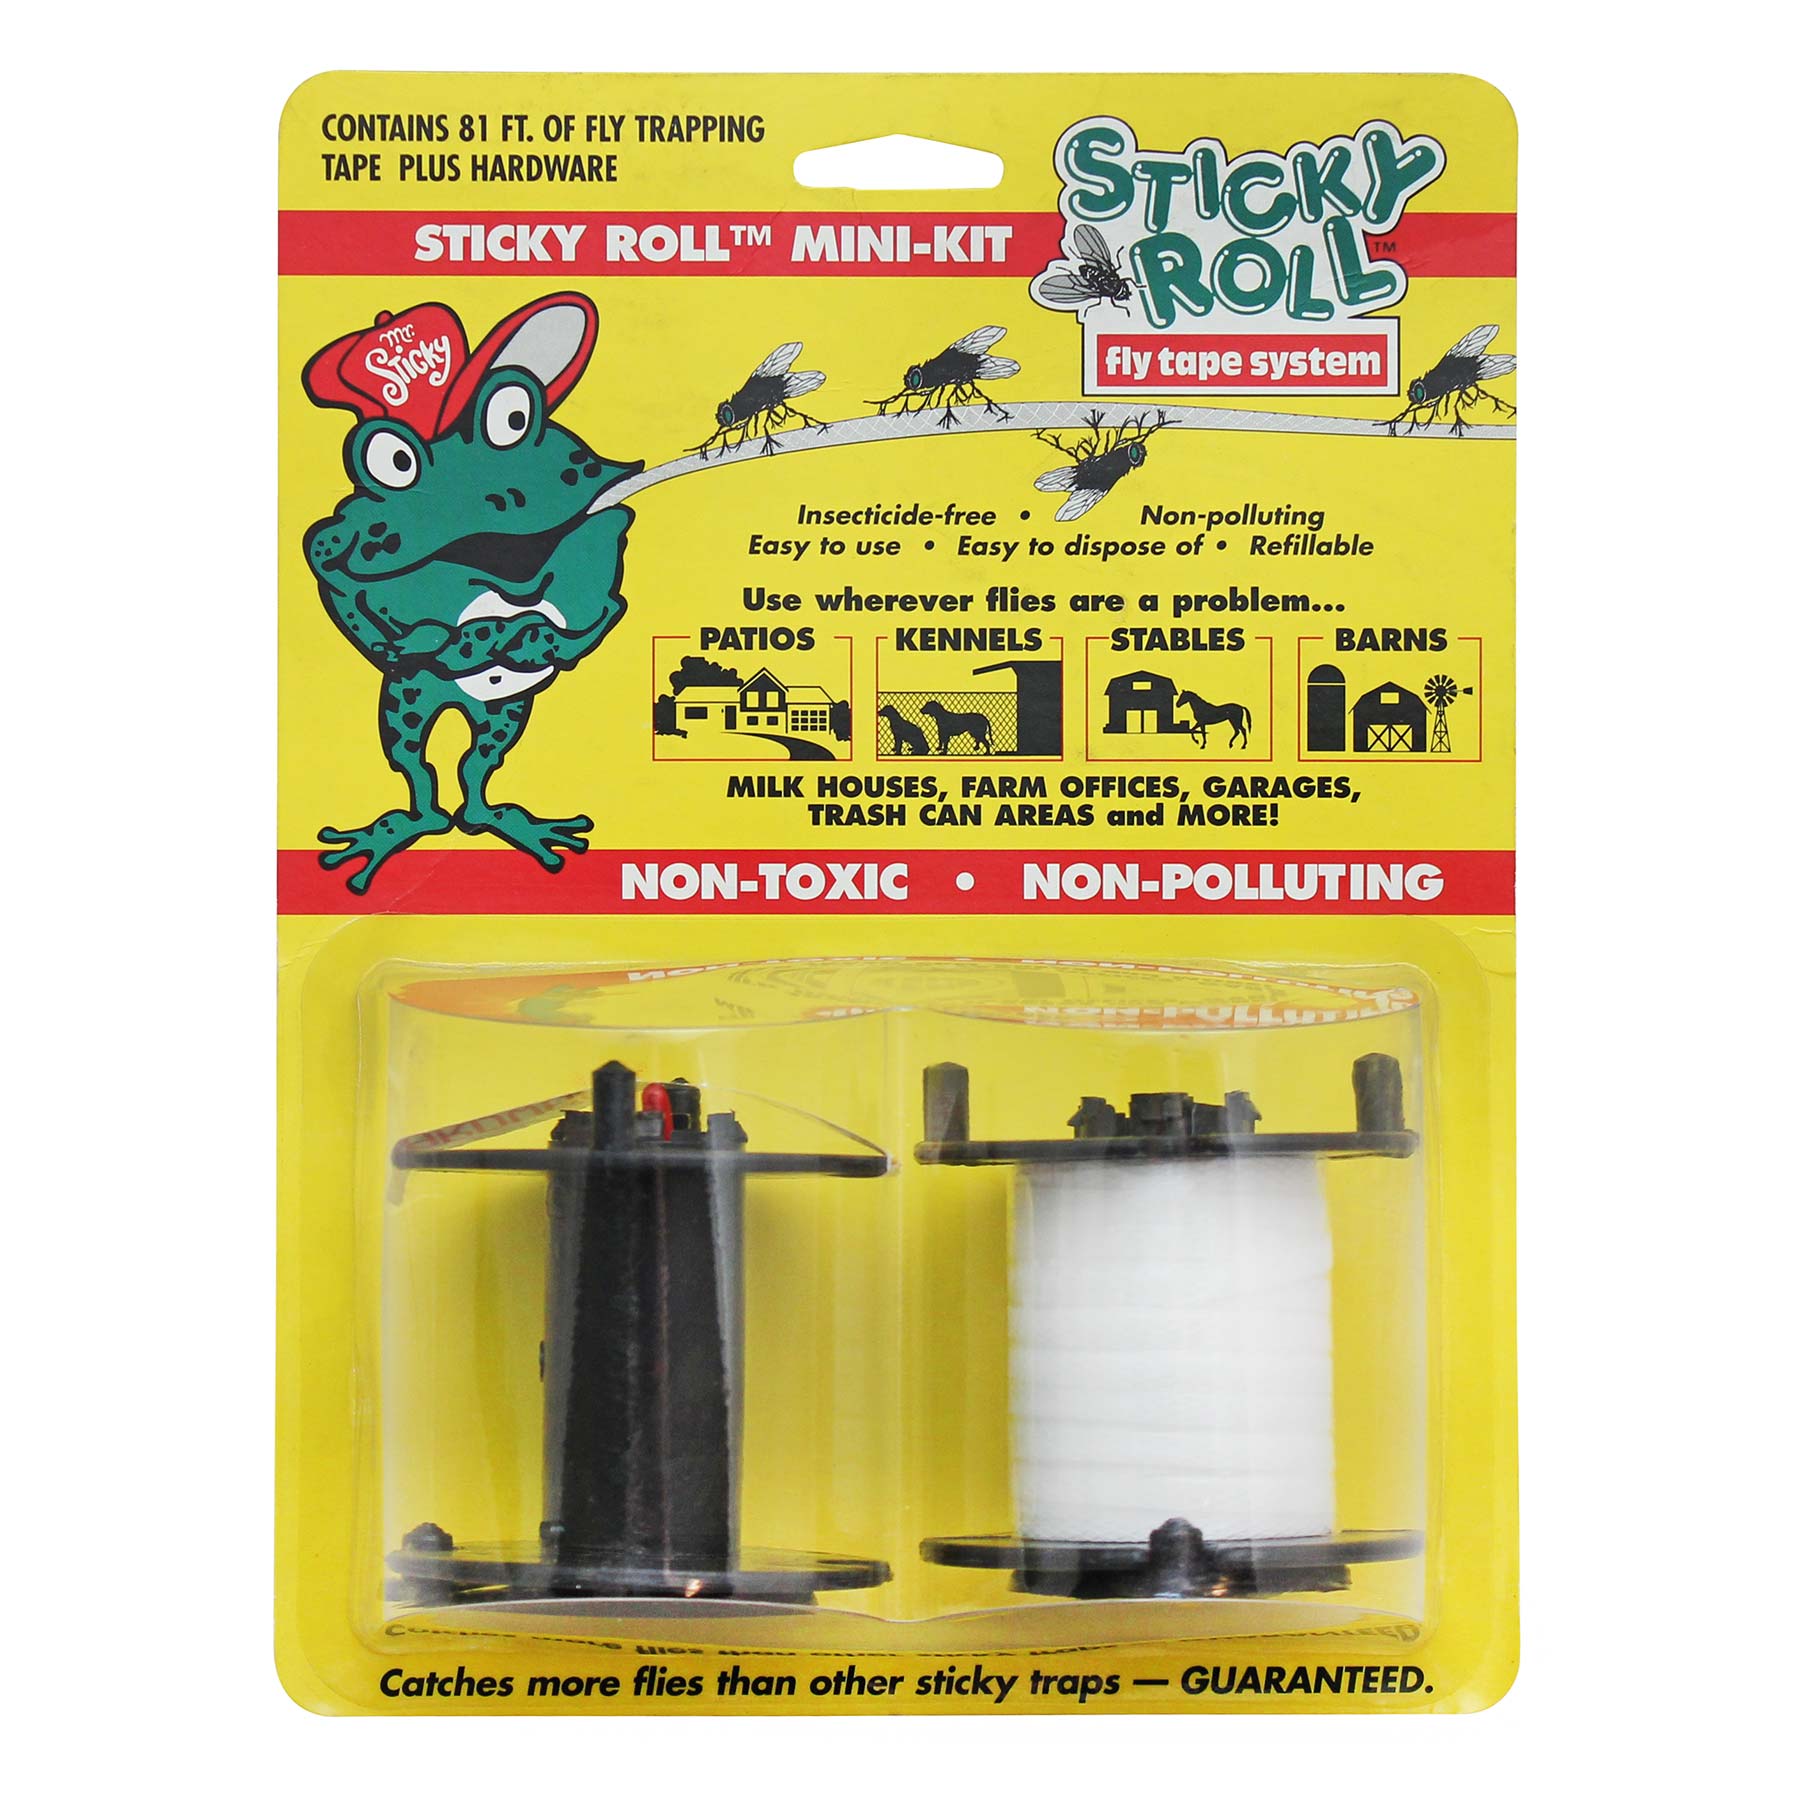 Refill Tape for Sticky Roll Fly Tape Kits